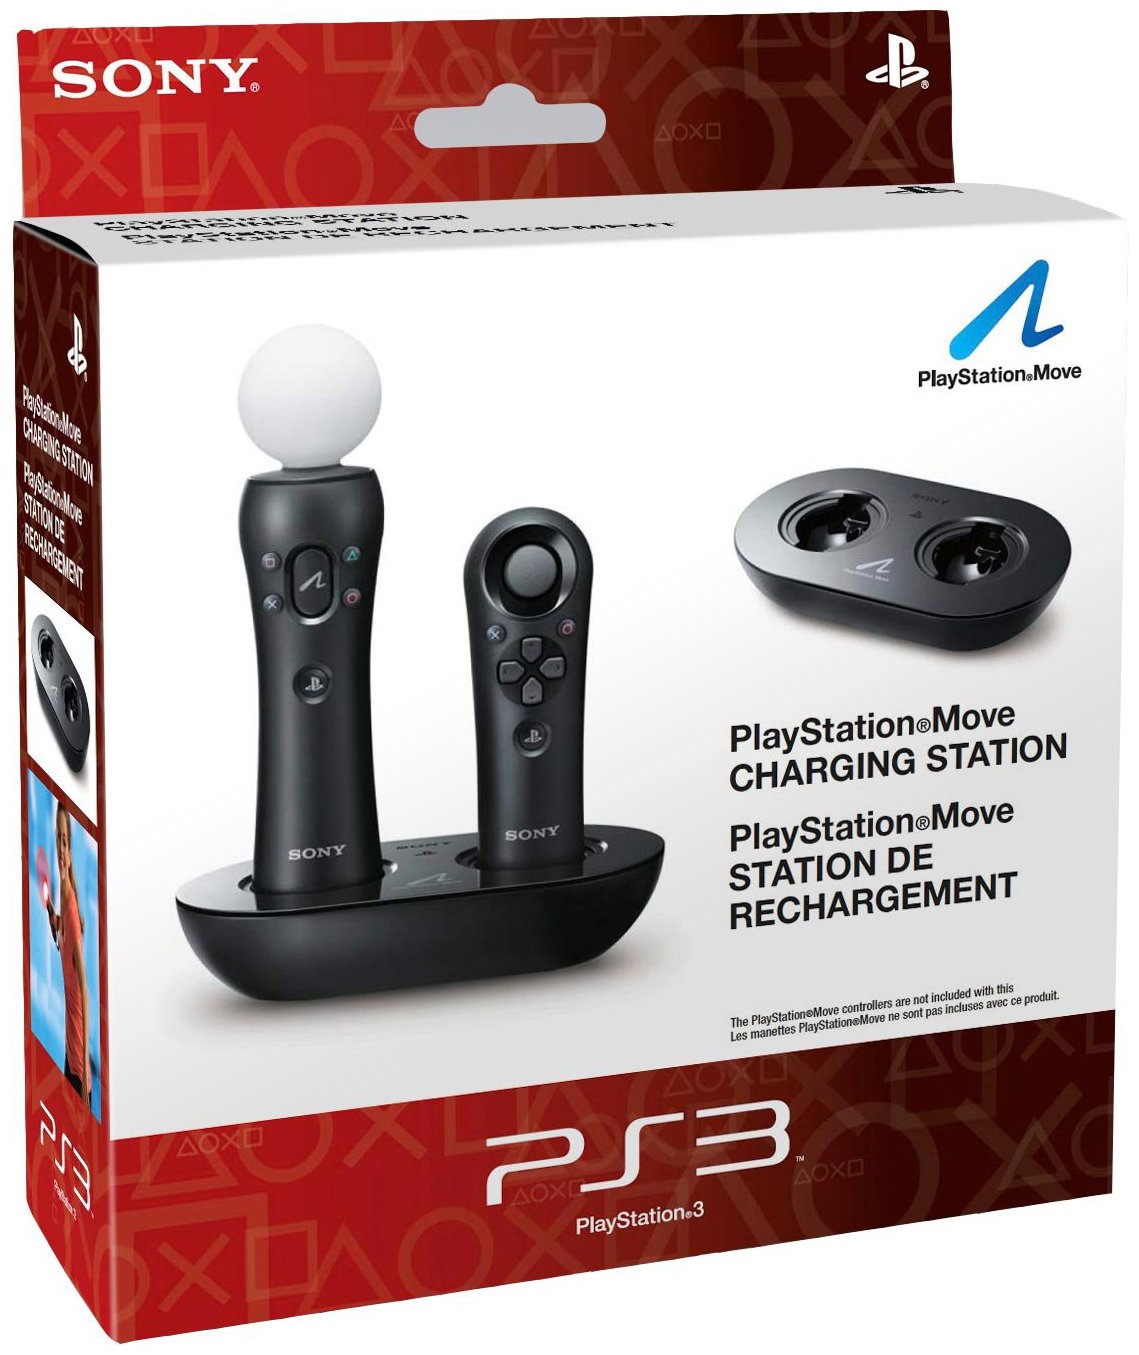 ps move docking station